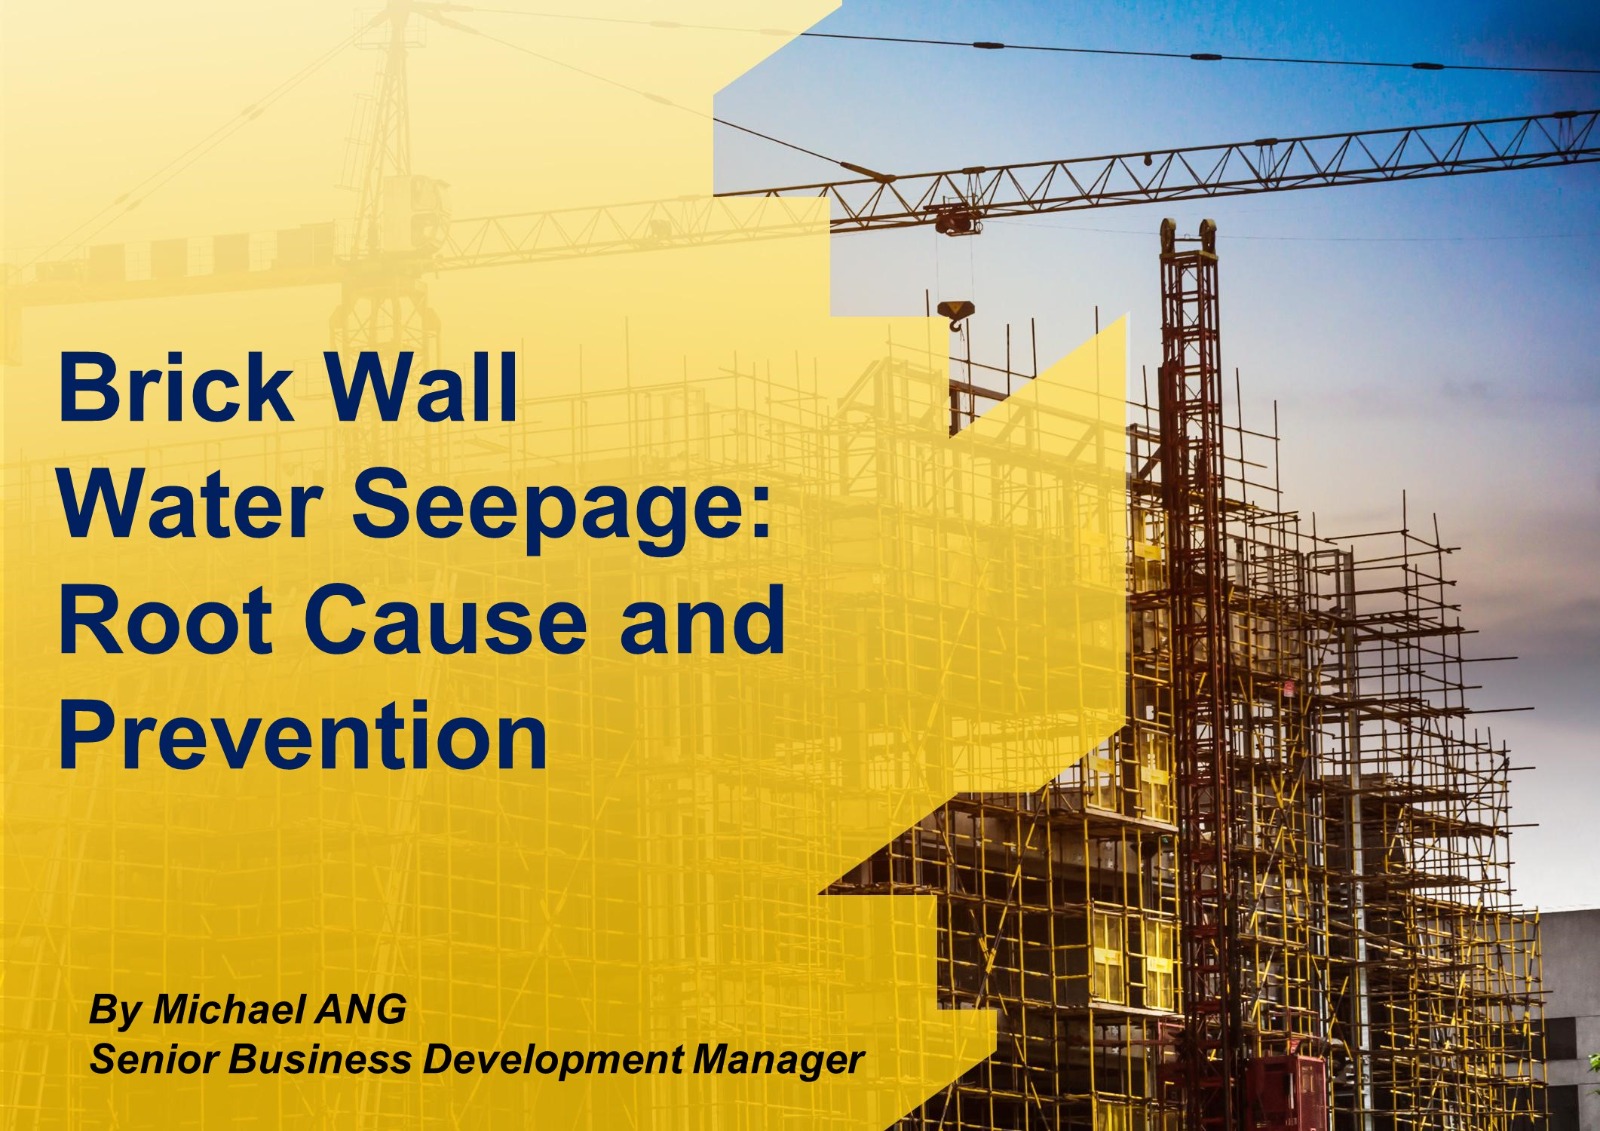 Brick Wall Water Seepage: Root Cause and Prevention